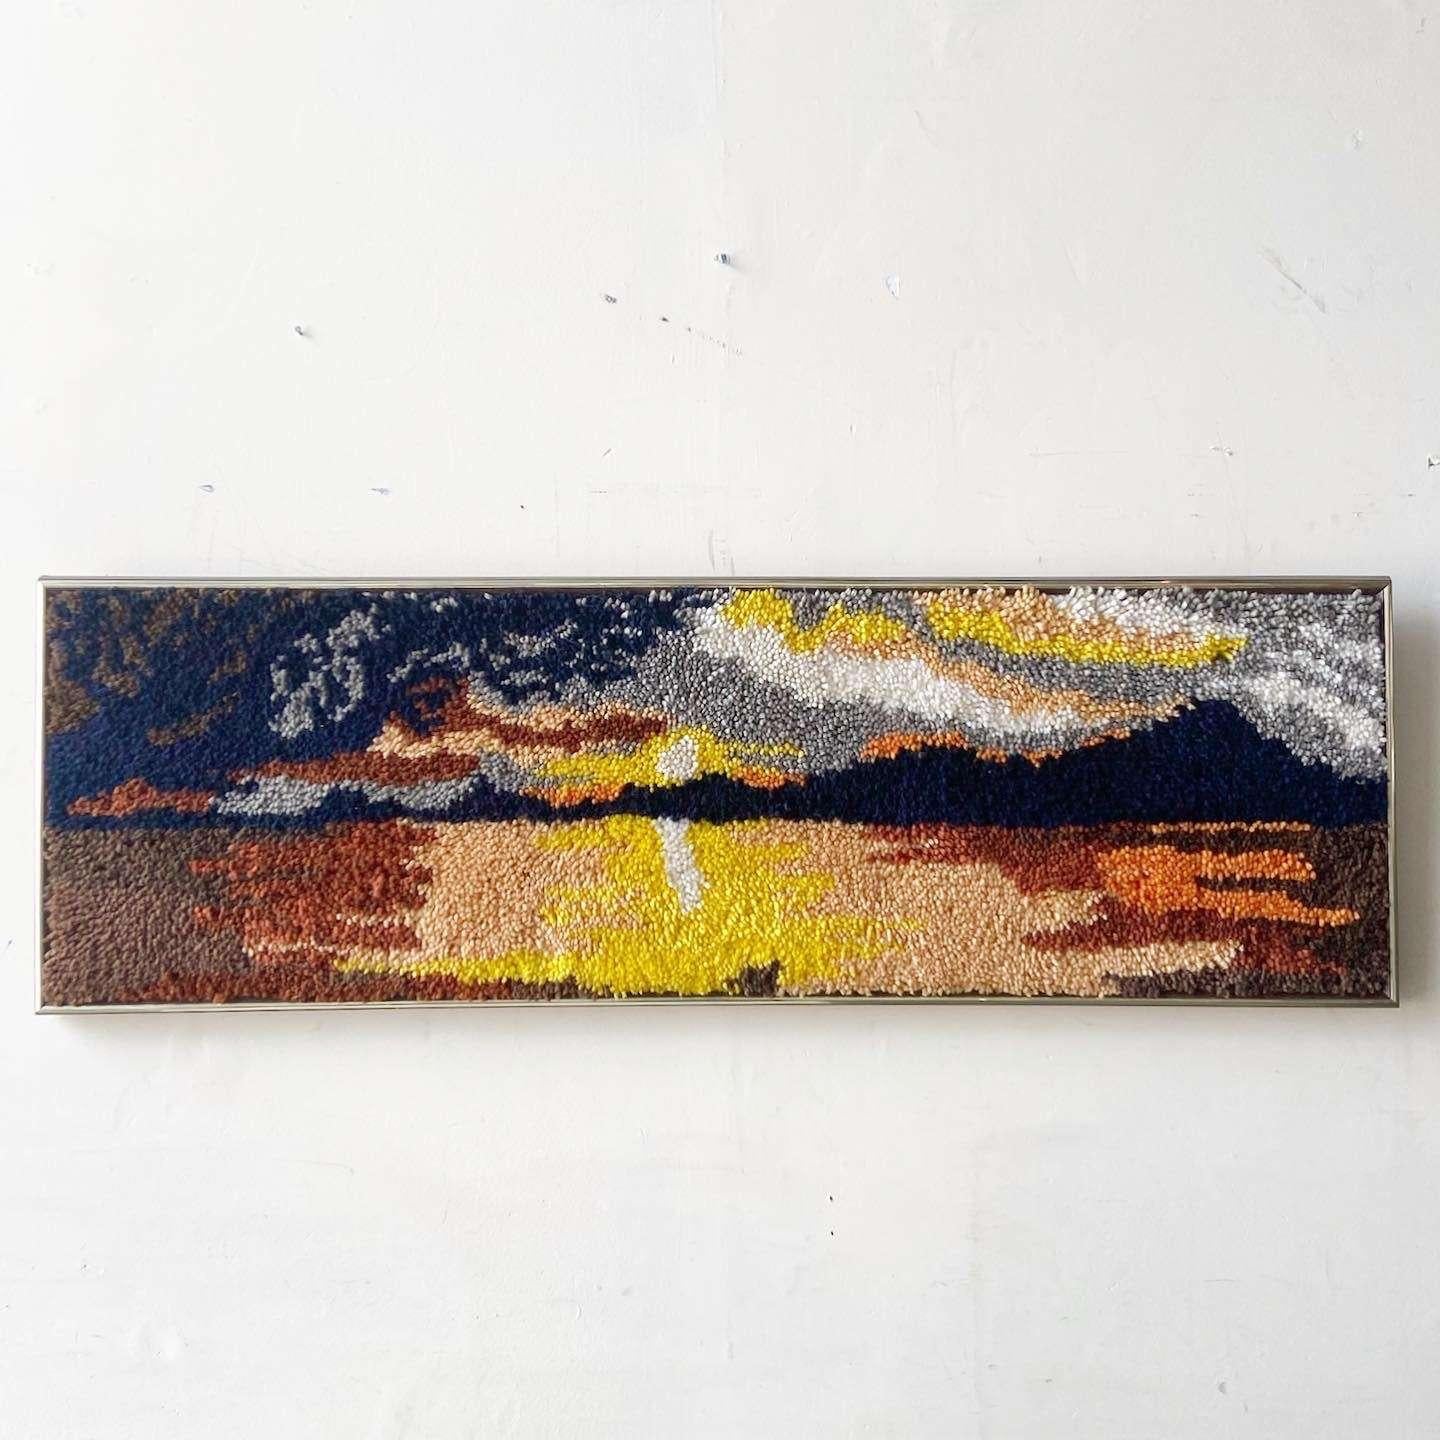 Exceptional mid century modern framed textile art. Features a sunset over the maintains in the distance.